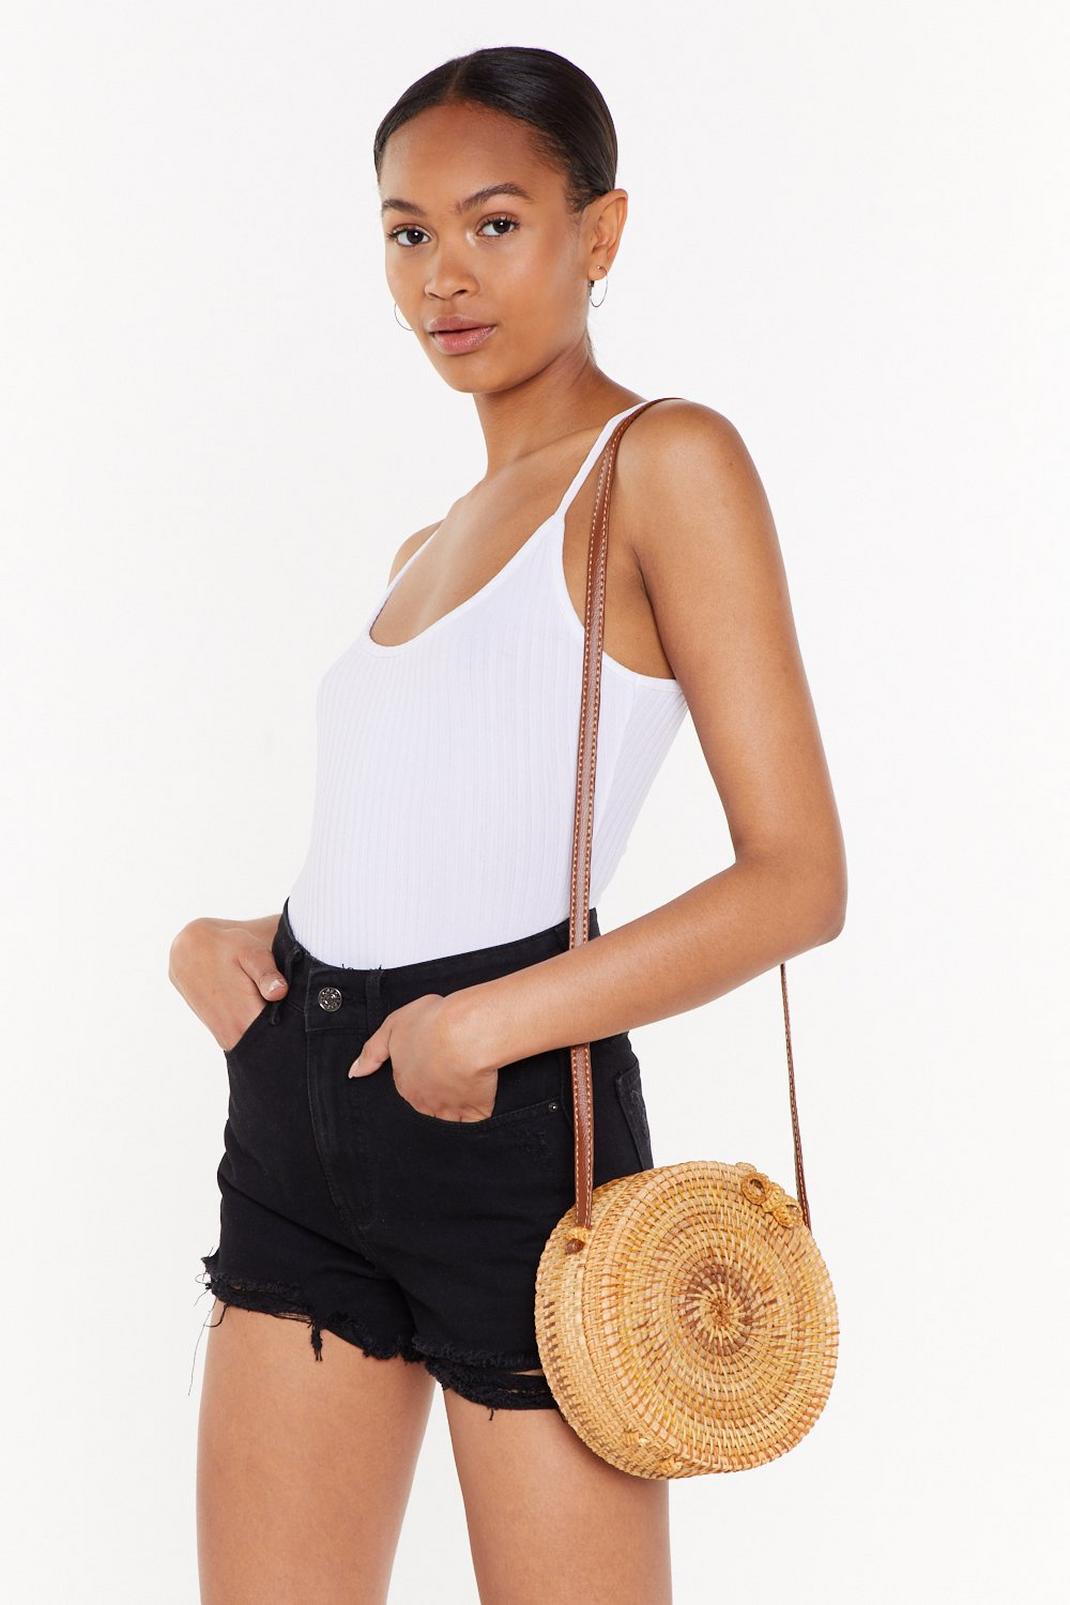 WANT One More Round Wicker Crossbody Bag | Nasty Gal